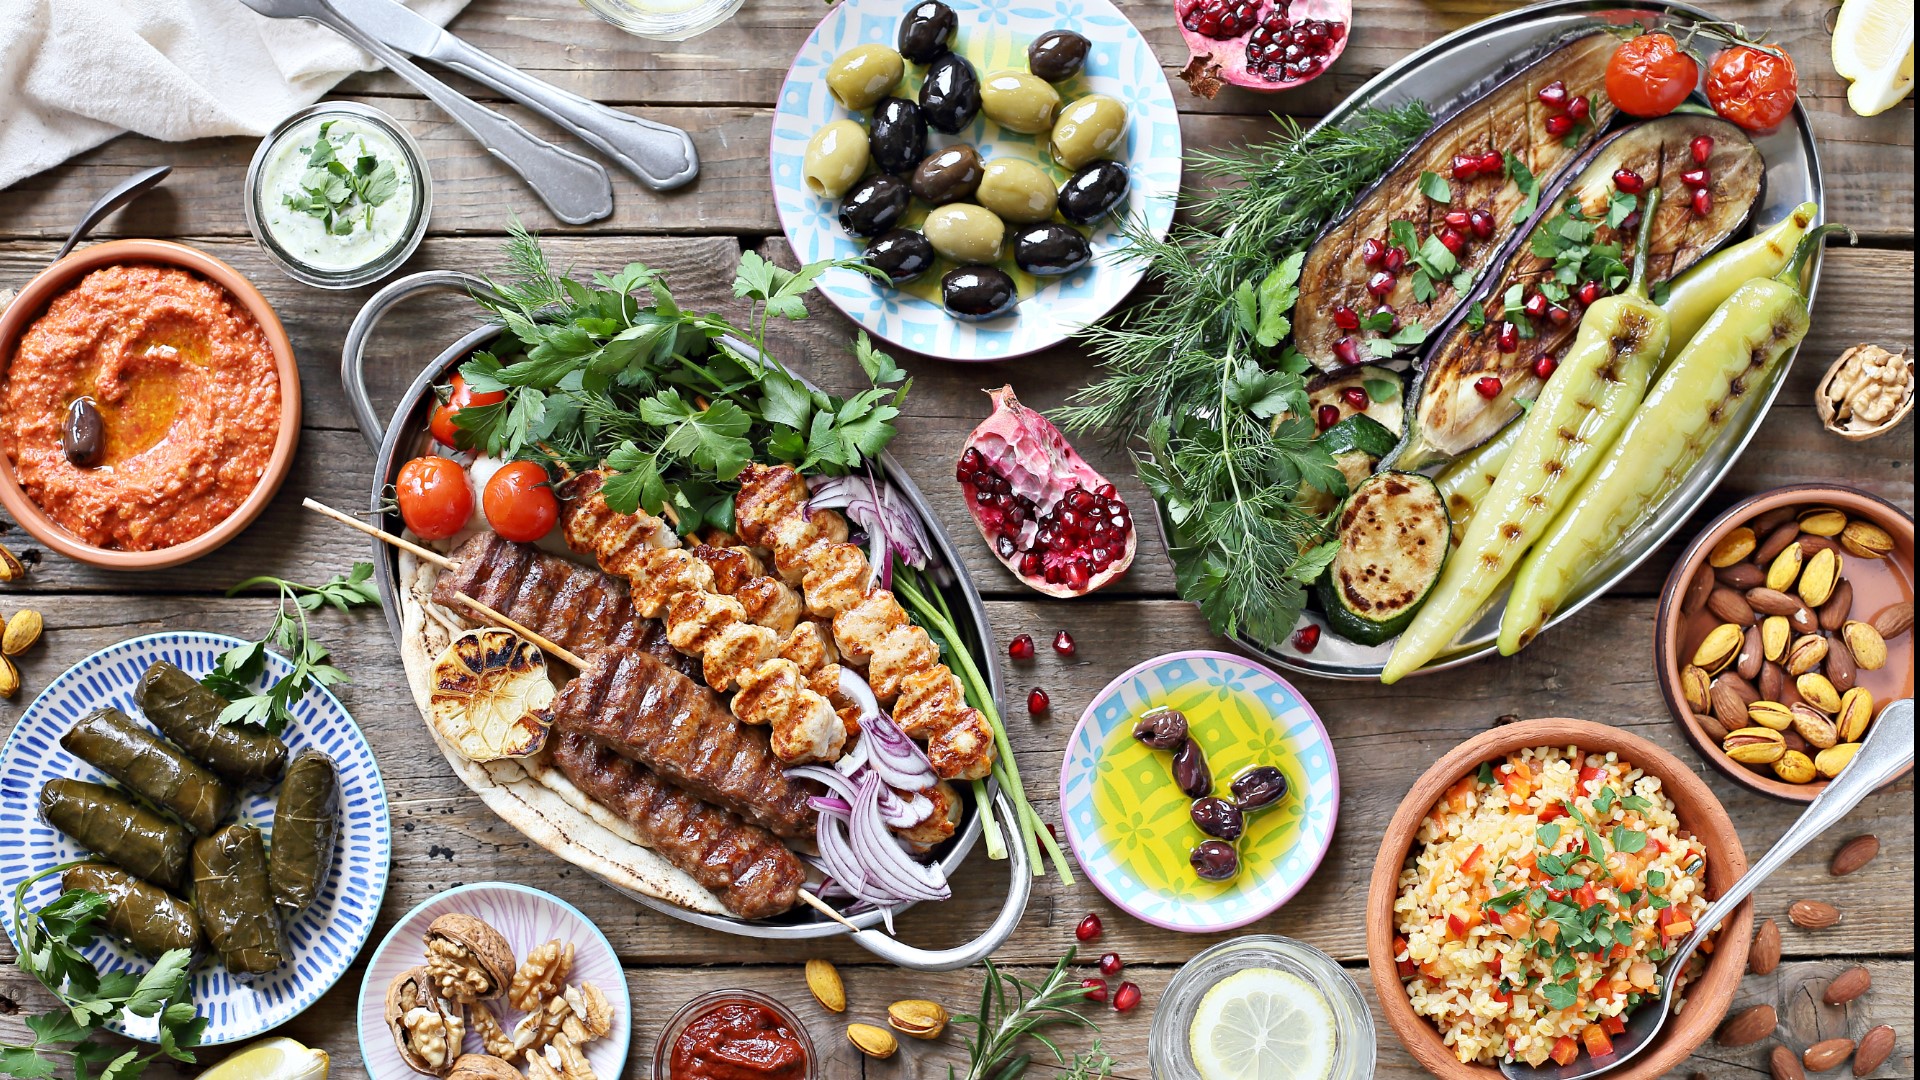 The Mediterranean Way diet is a 10-week program, where you learn how to make healthy, delicious whole foods.